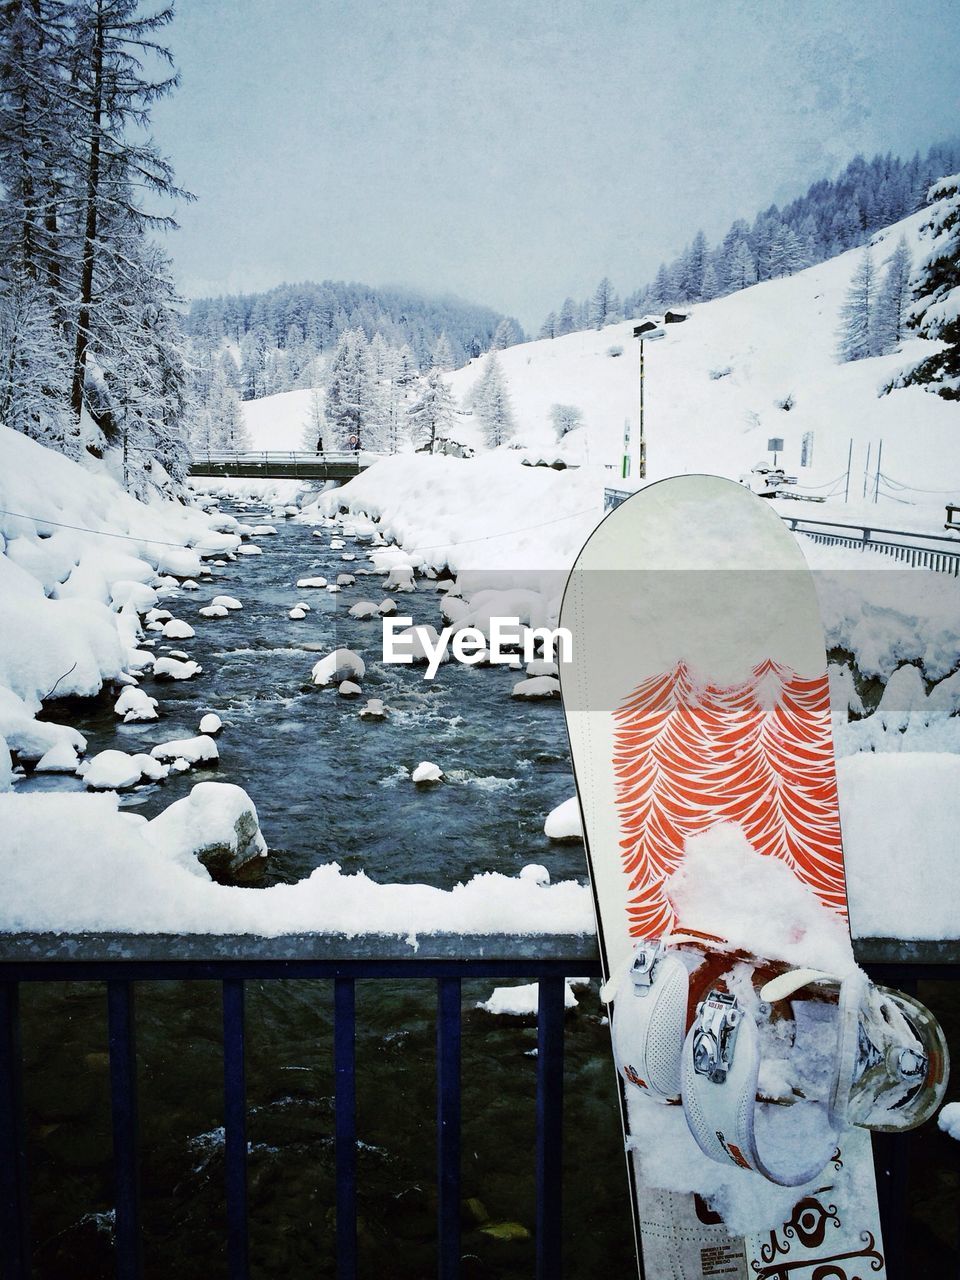 Snowboard against river in snow